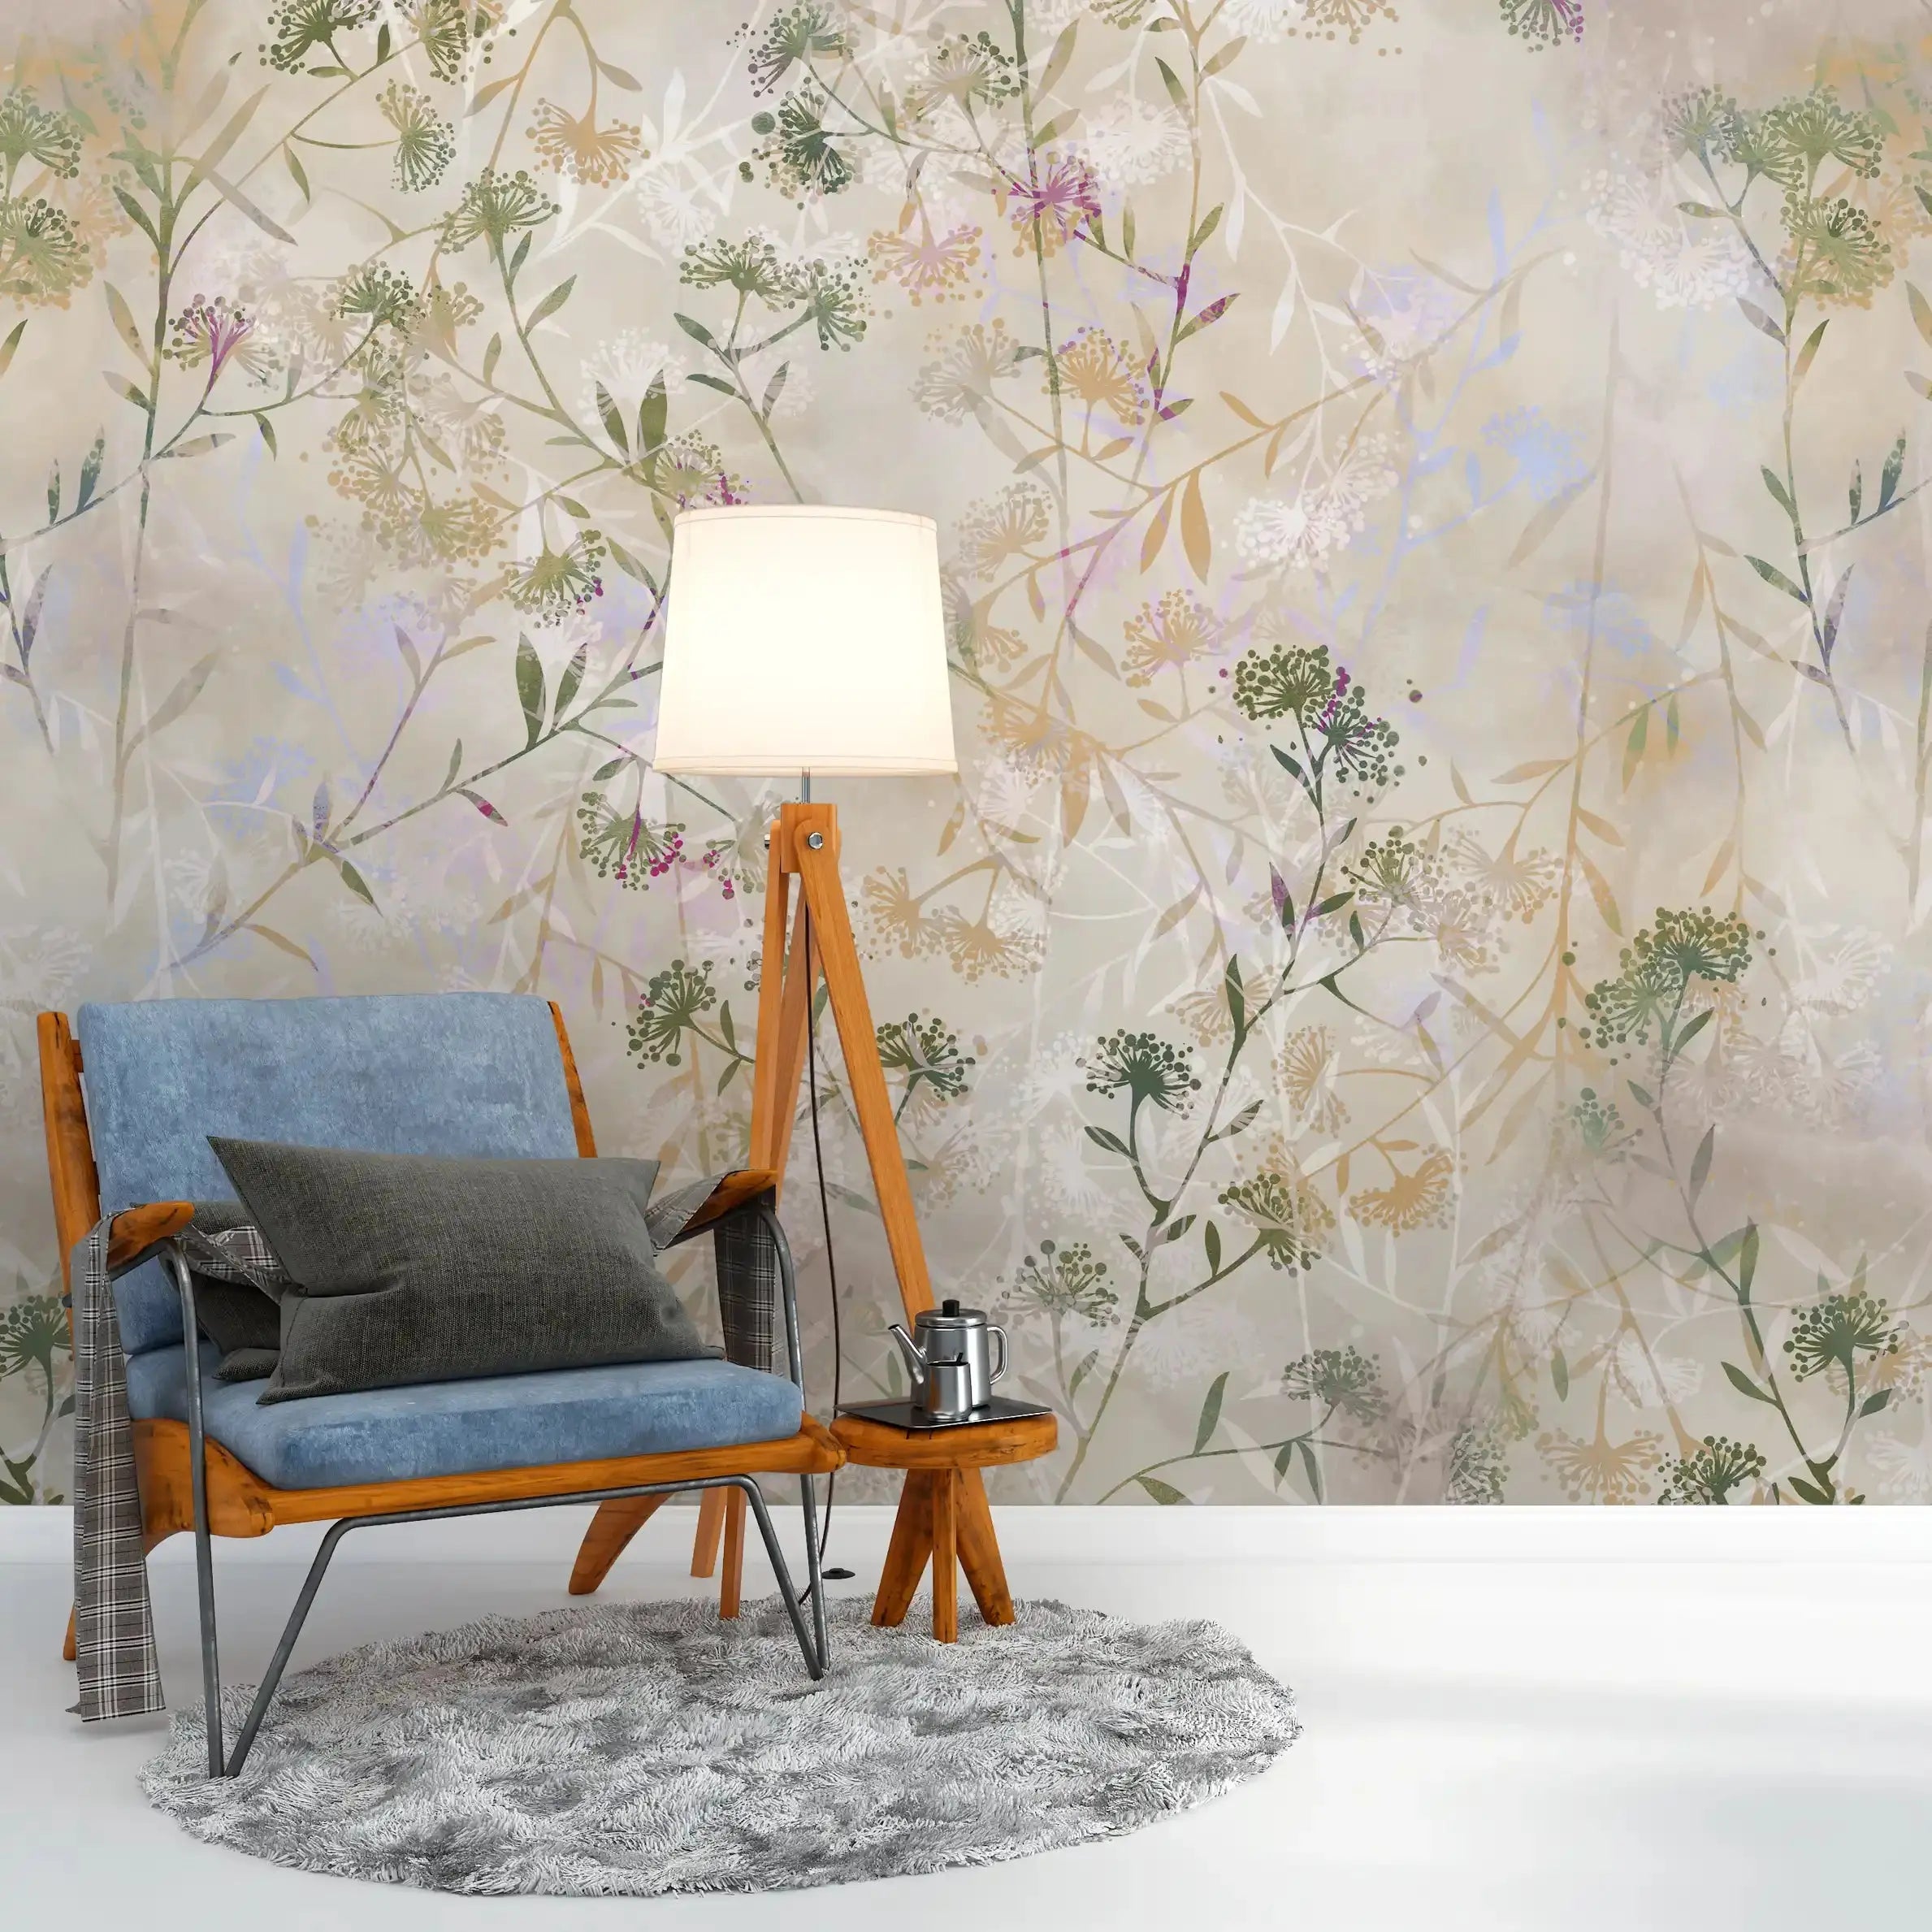 3009-A / Wild Floral Wall Mural - Beige Patterned Peel and Stick Wallpaper for Bedroom and Bathroom - Artevella